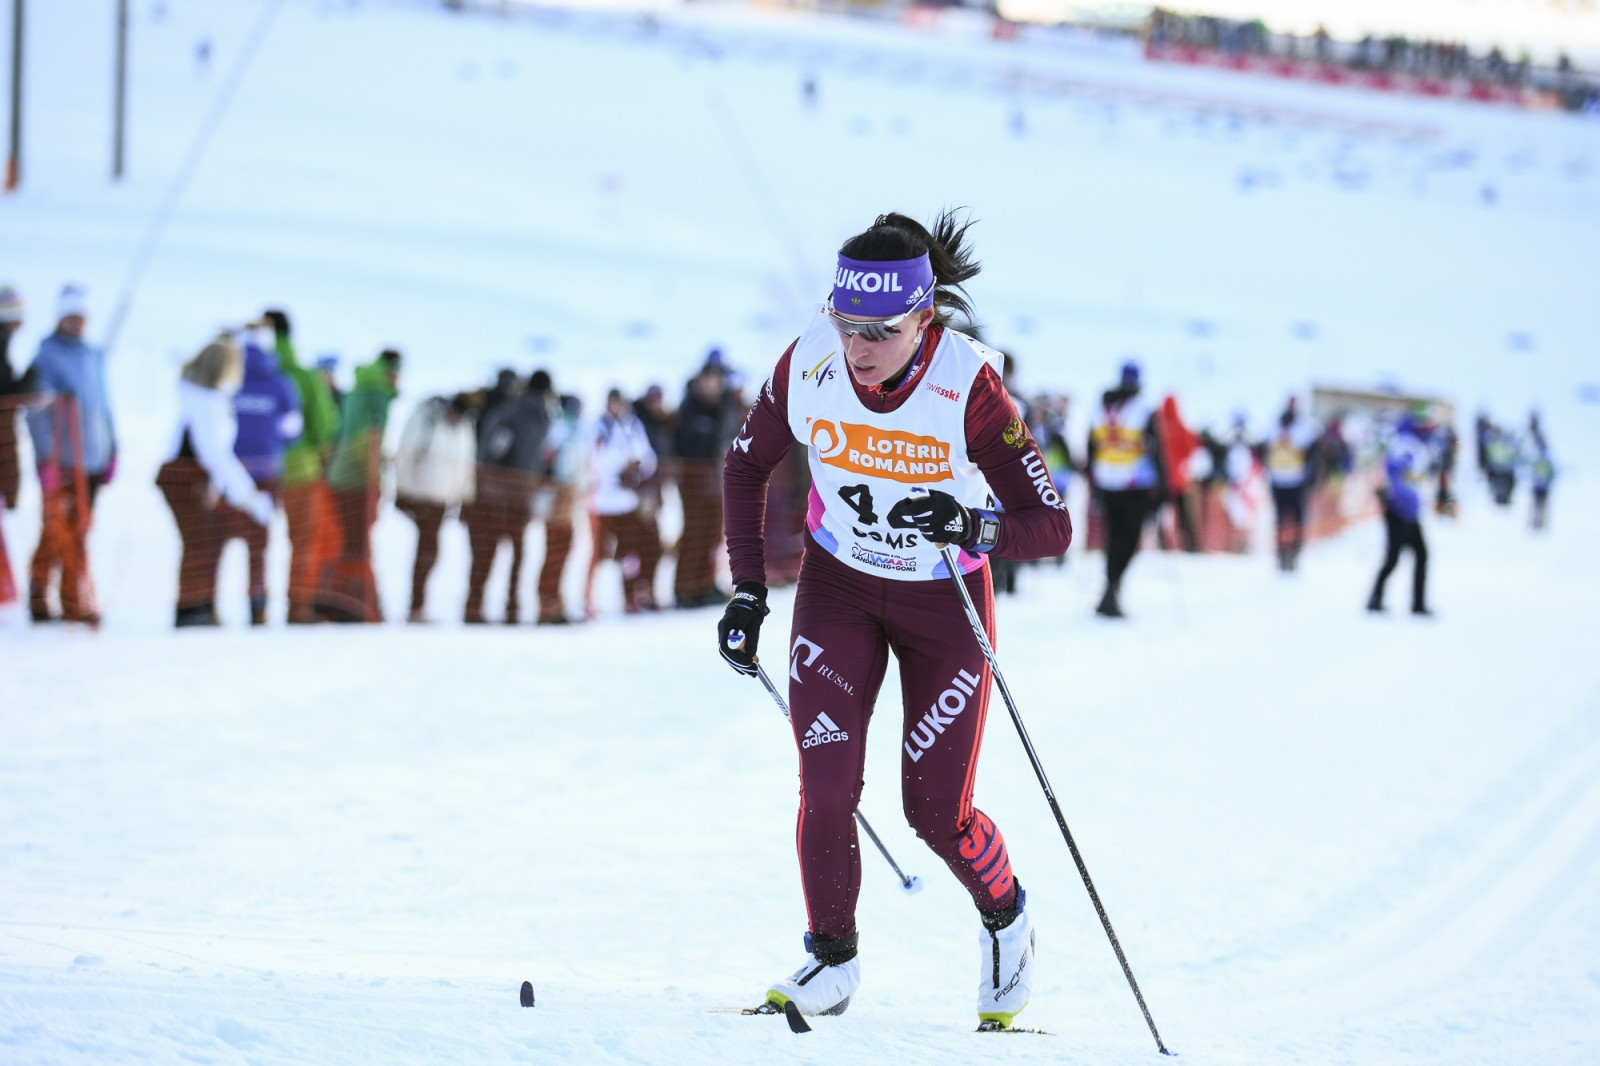 Yana Kirpichenko finished almost 14 seconds ahead of the chasing pack ©JWSC